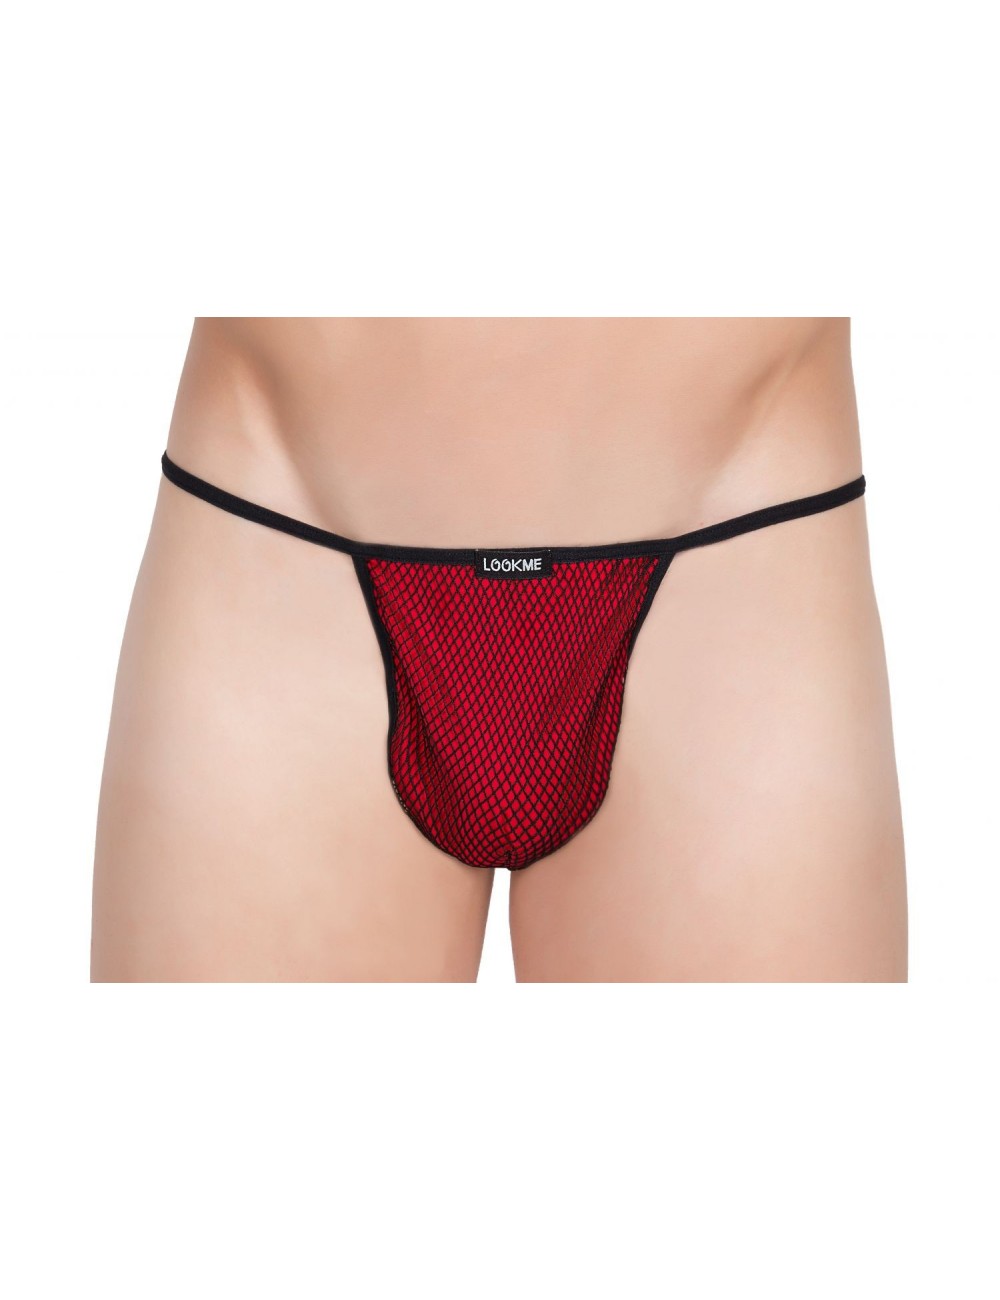 String New Look 799-01 Rouge - LM799-01RED